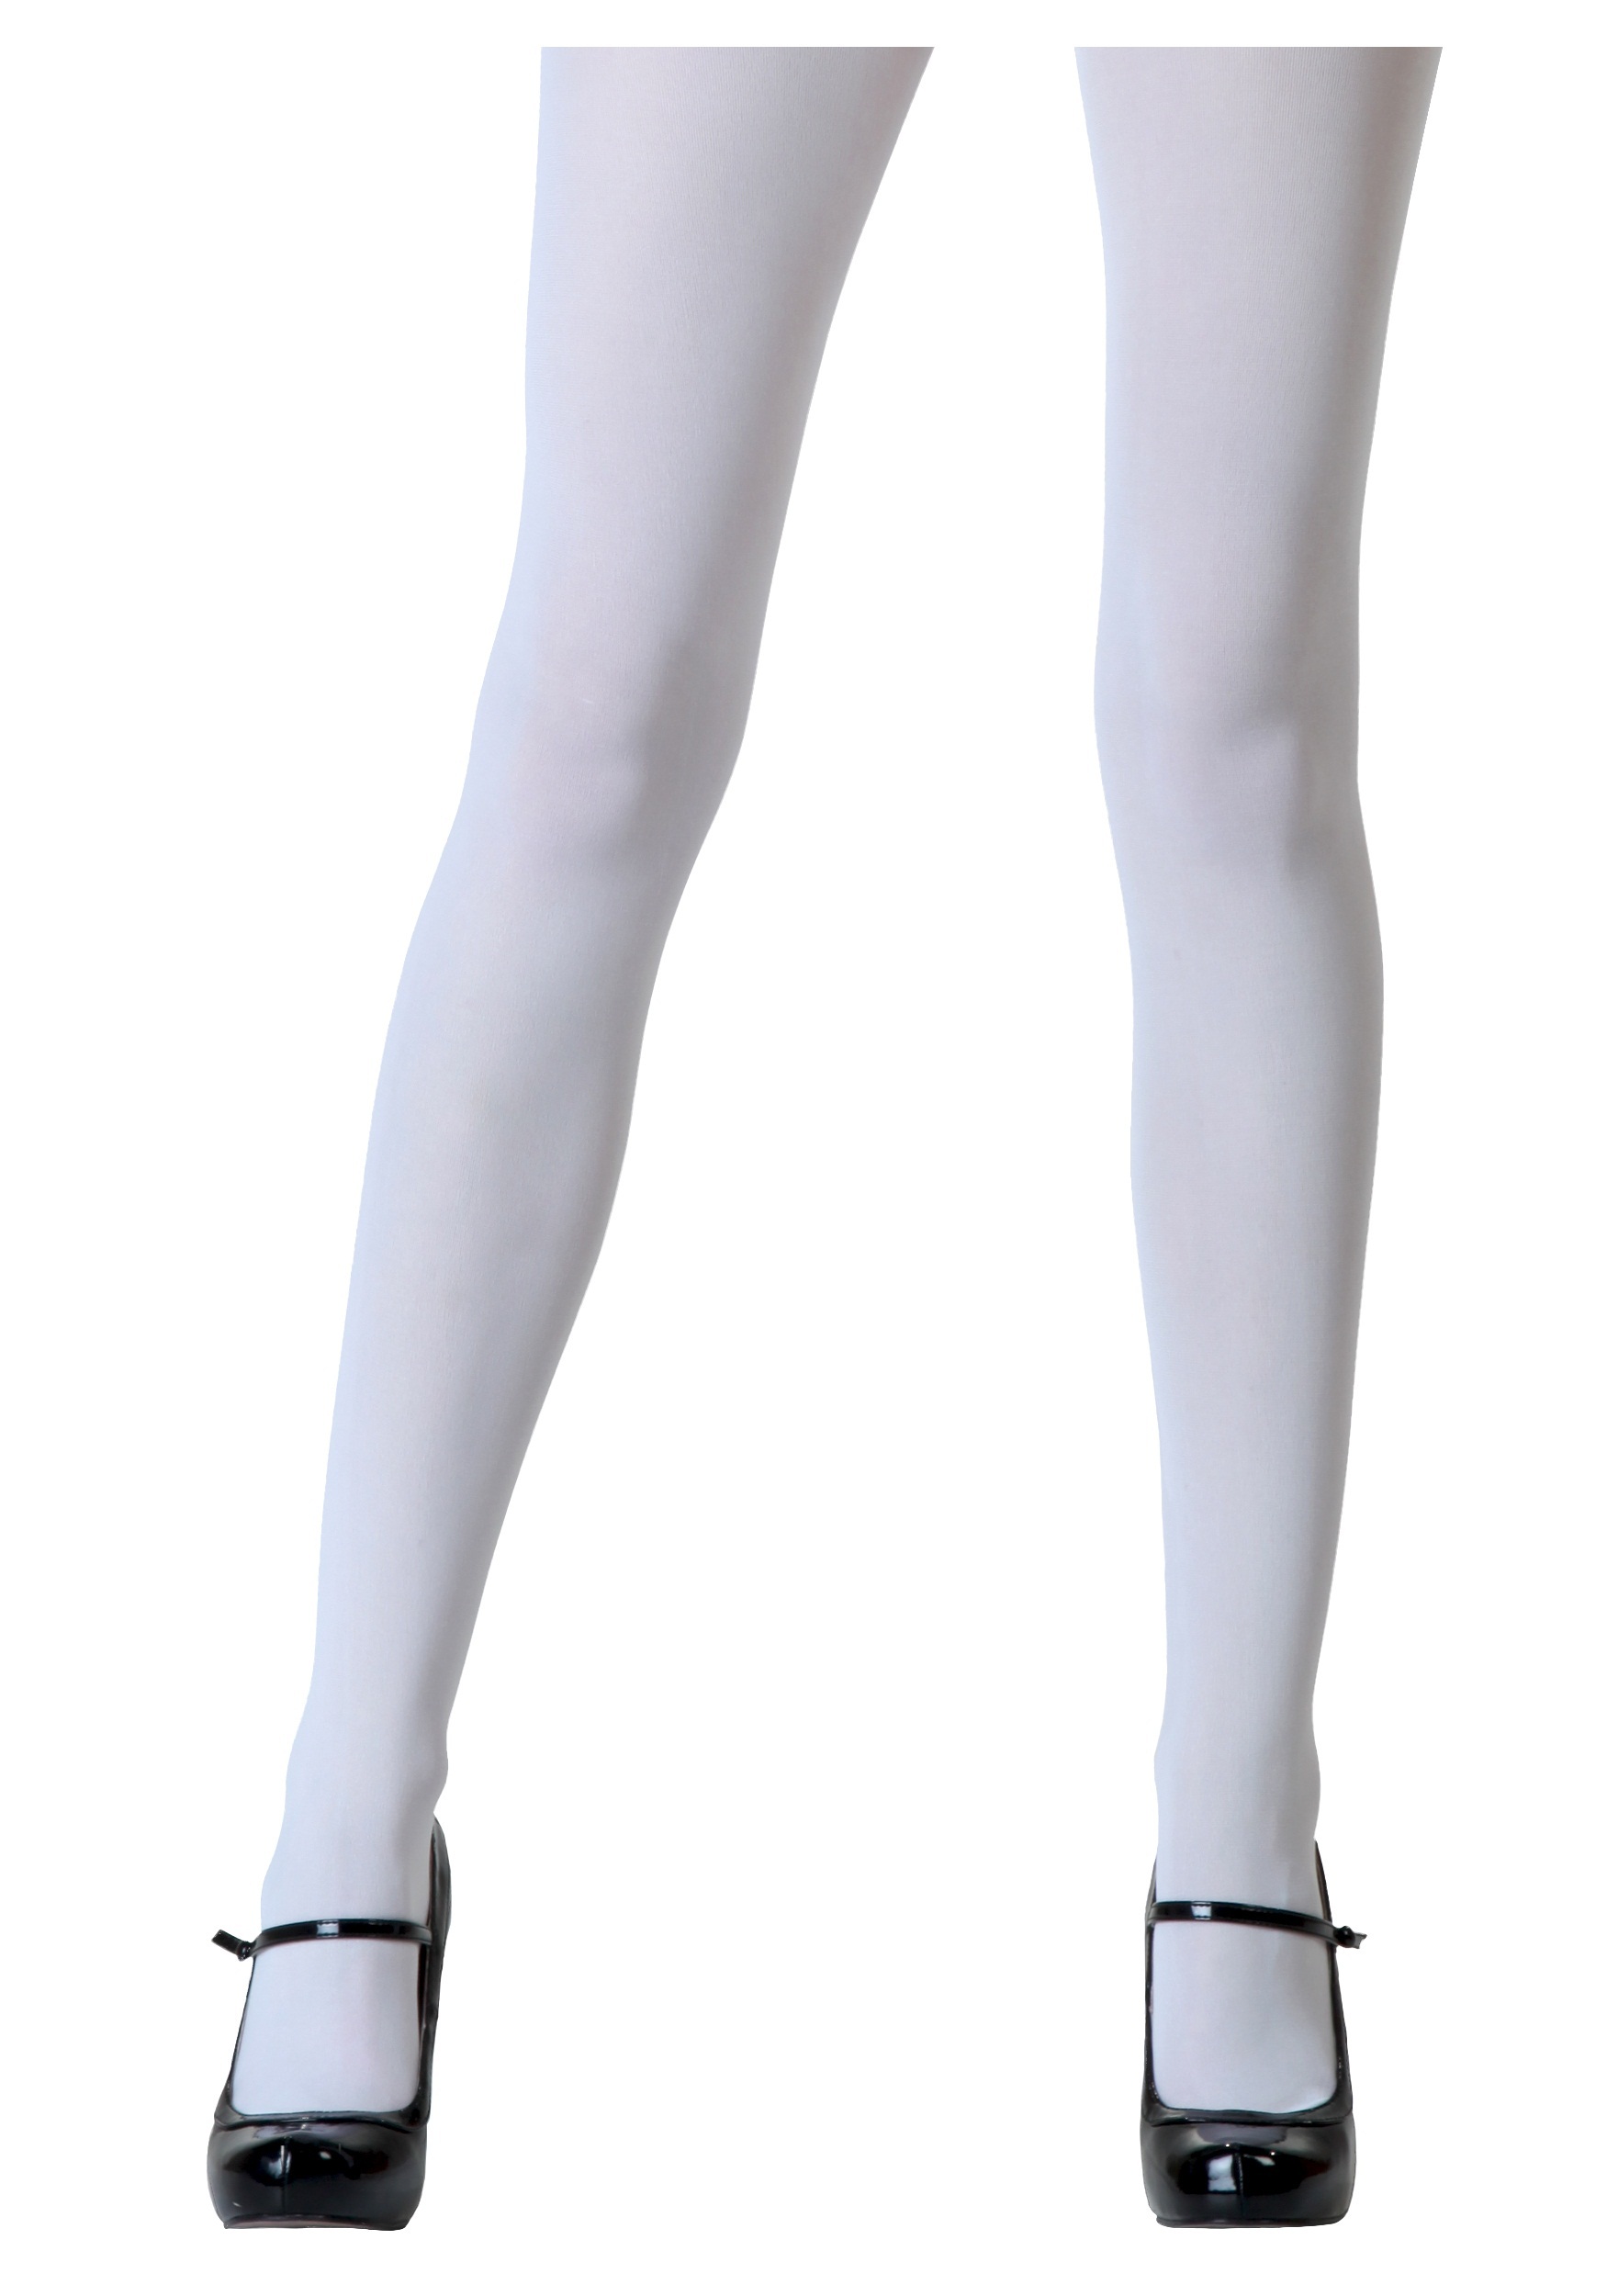 https://images.halloweencostumes.ca/products/13723/1-1/plus-size-white-tights.jpg